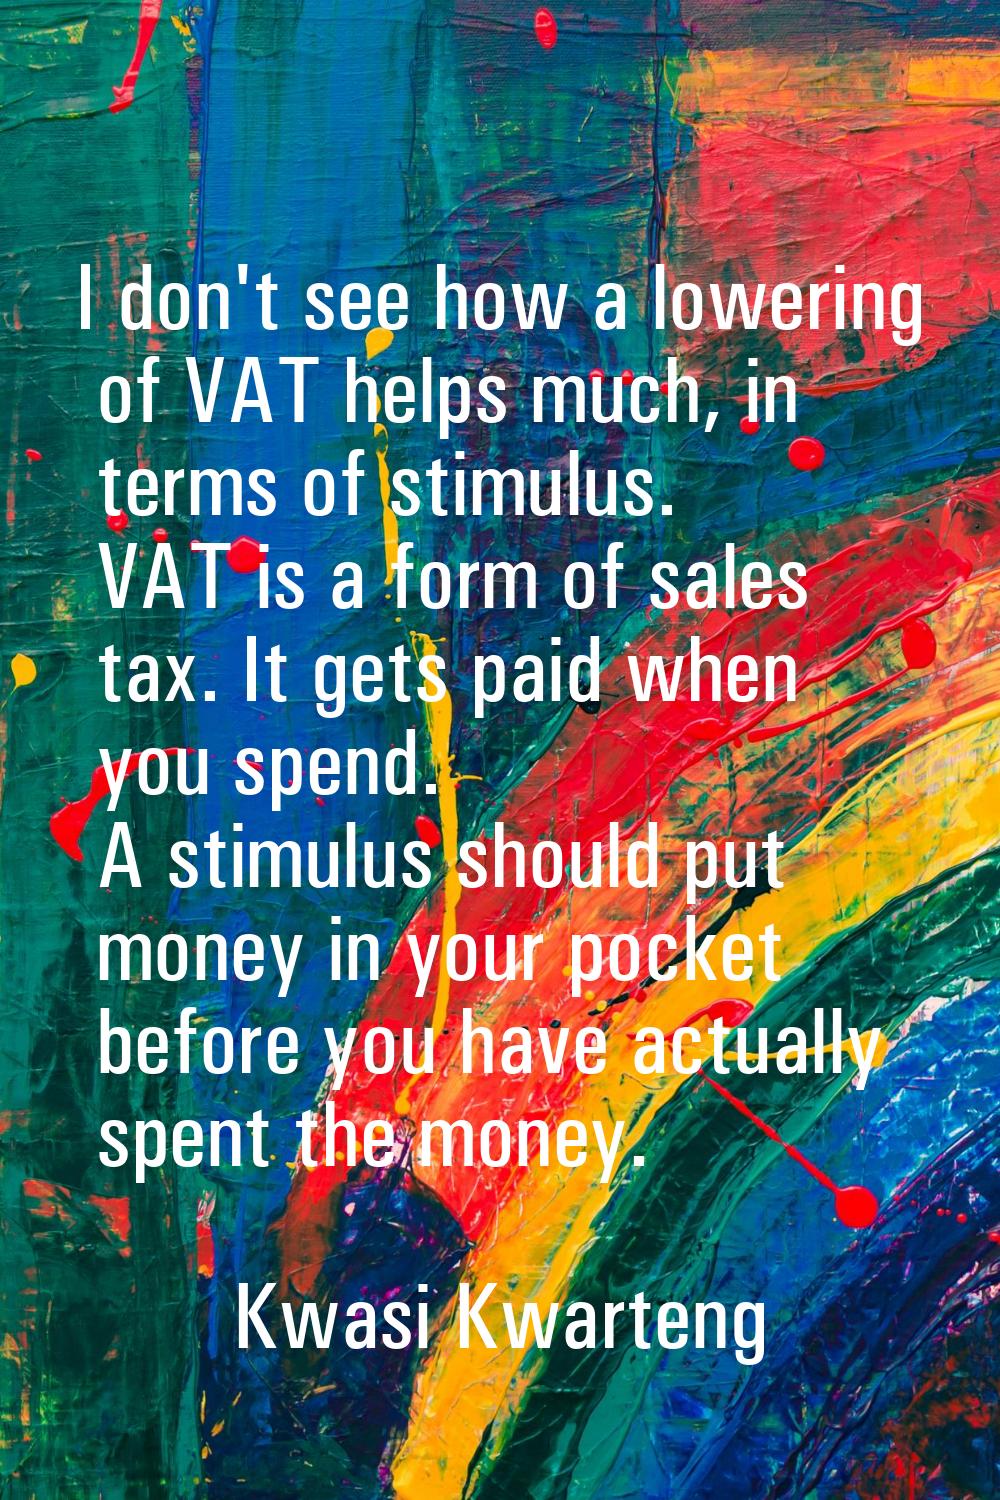 I don't see how a lowering of VAT helps much, in terms of stimulus. VAT is a form of sales tax. It 